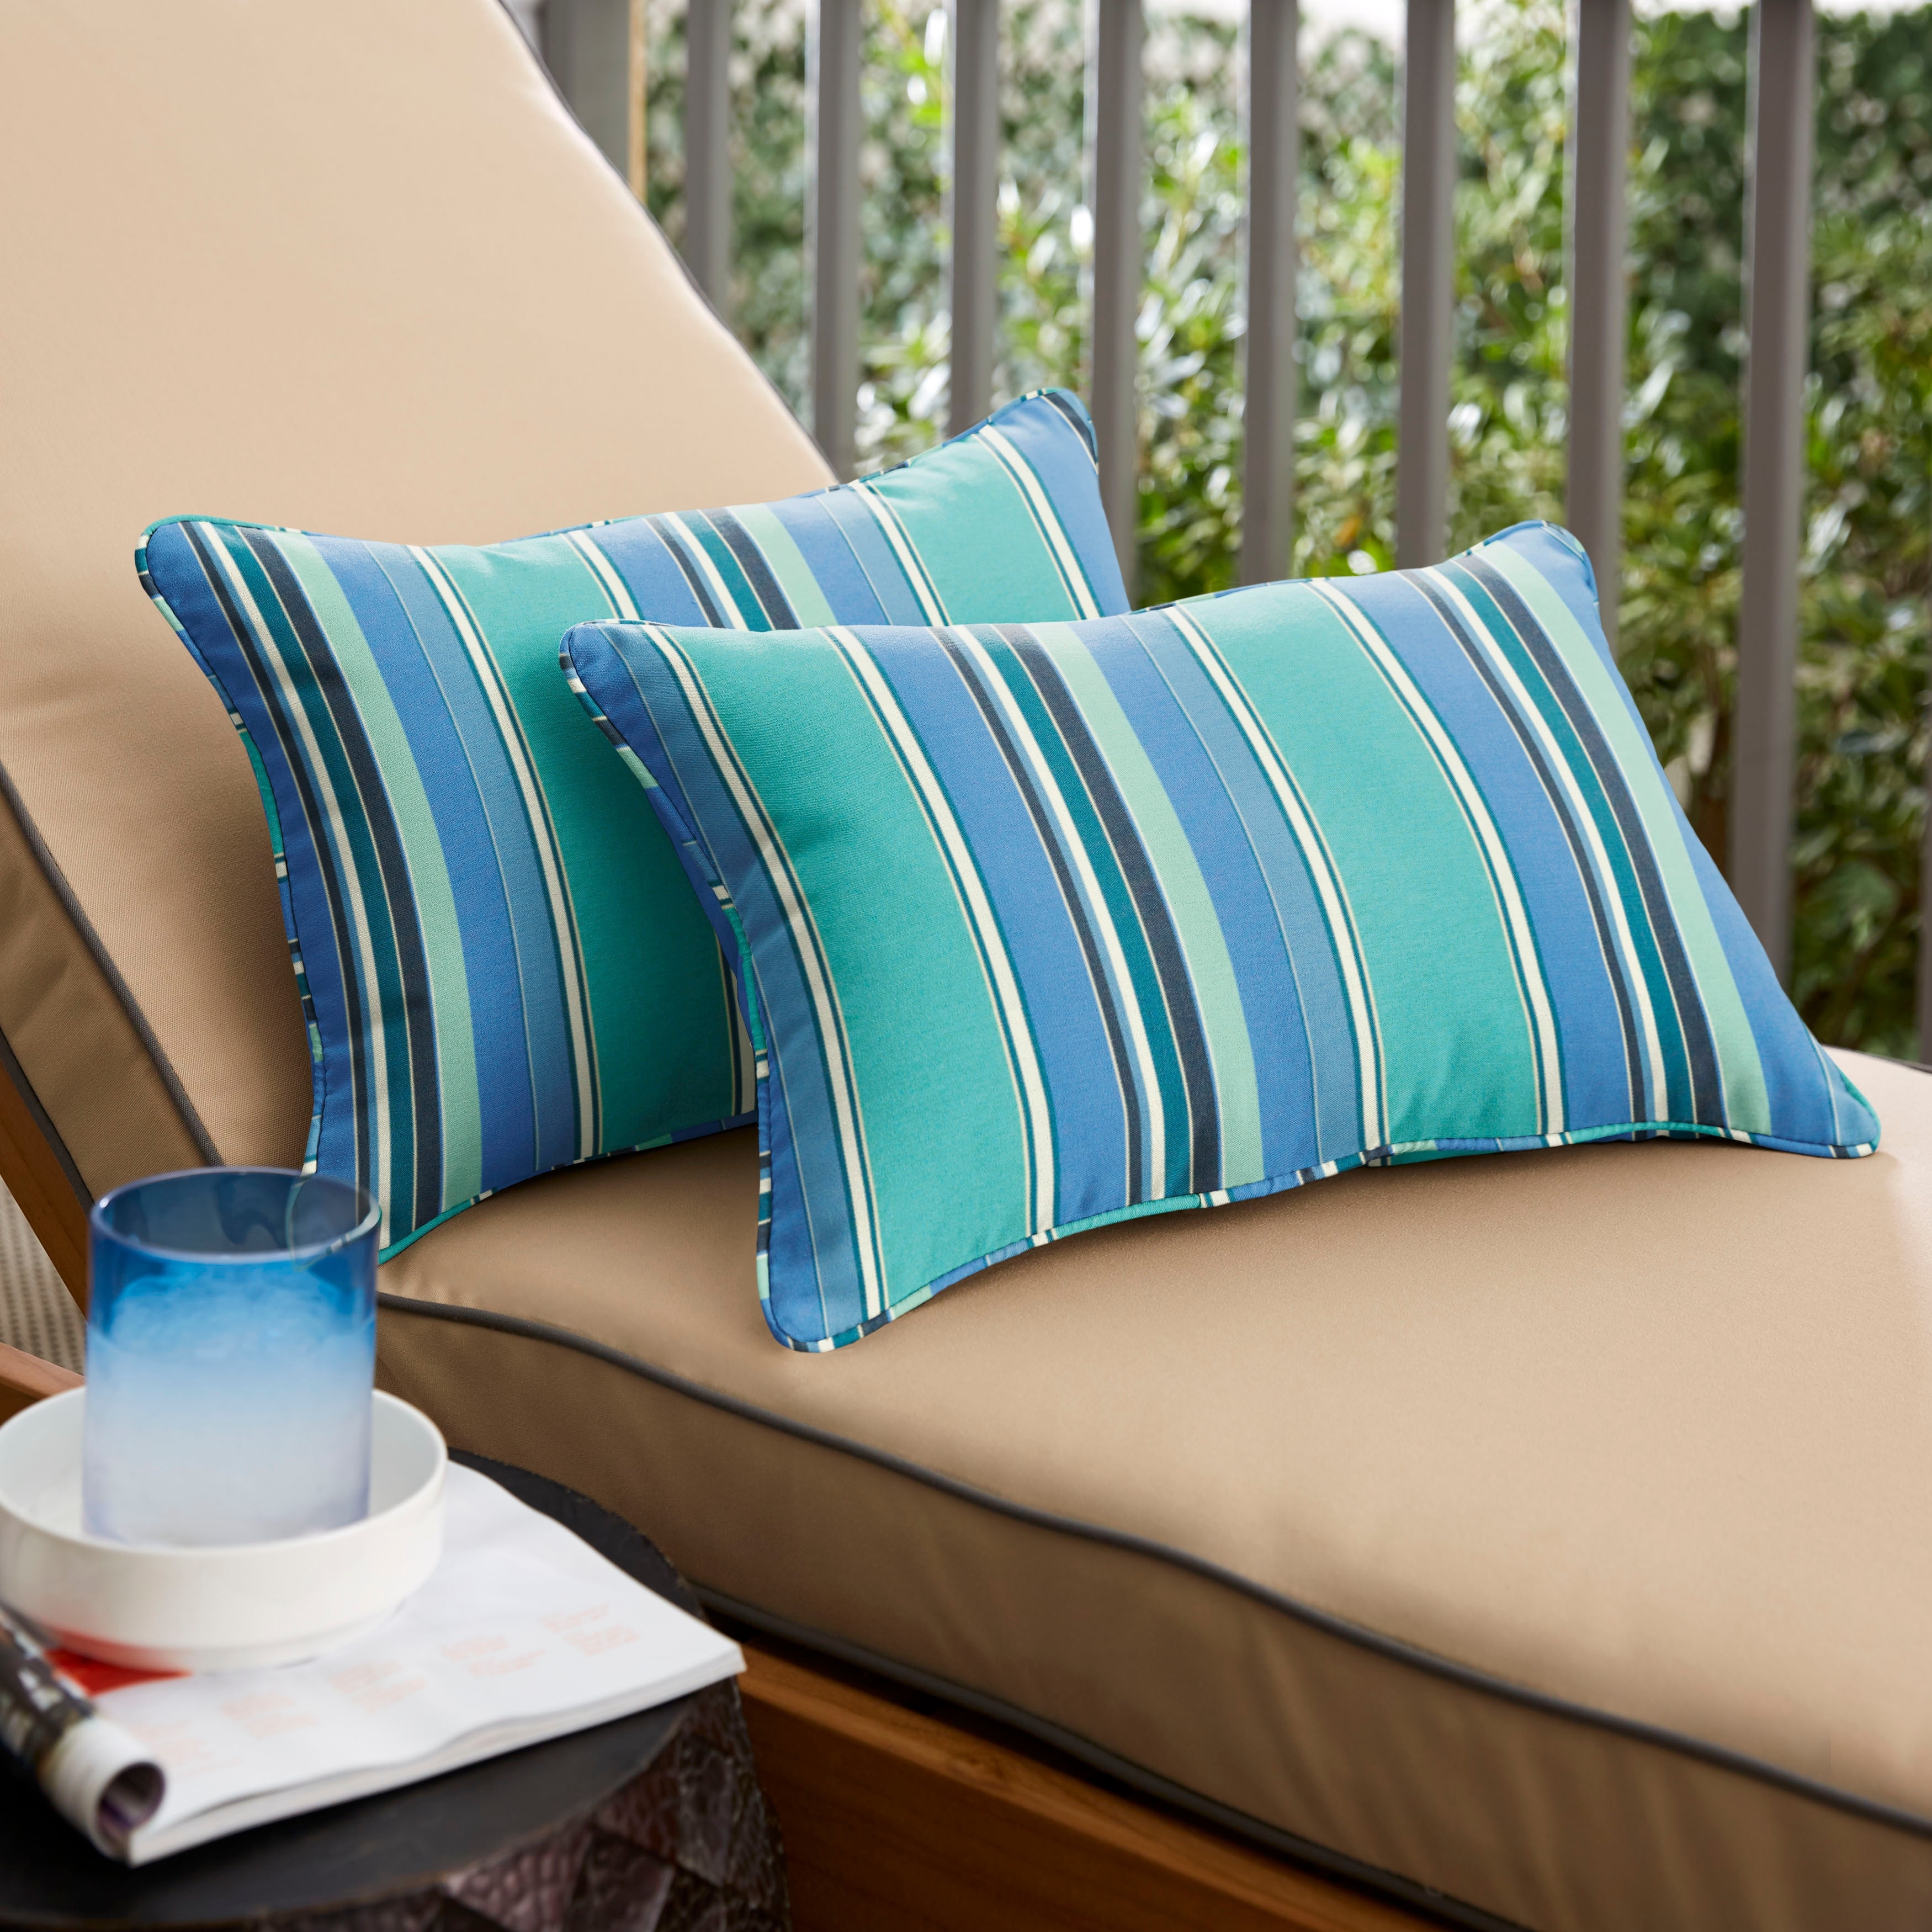 Dolce Oasis Corded Outdoor Pillows with Sunbrella Fabric (Set of 2